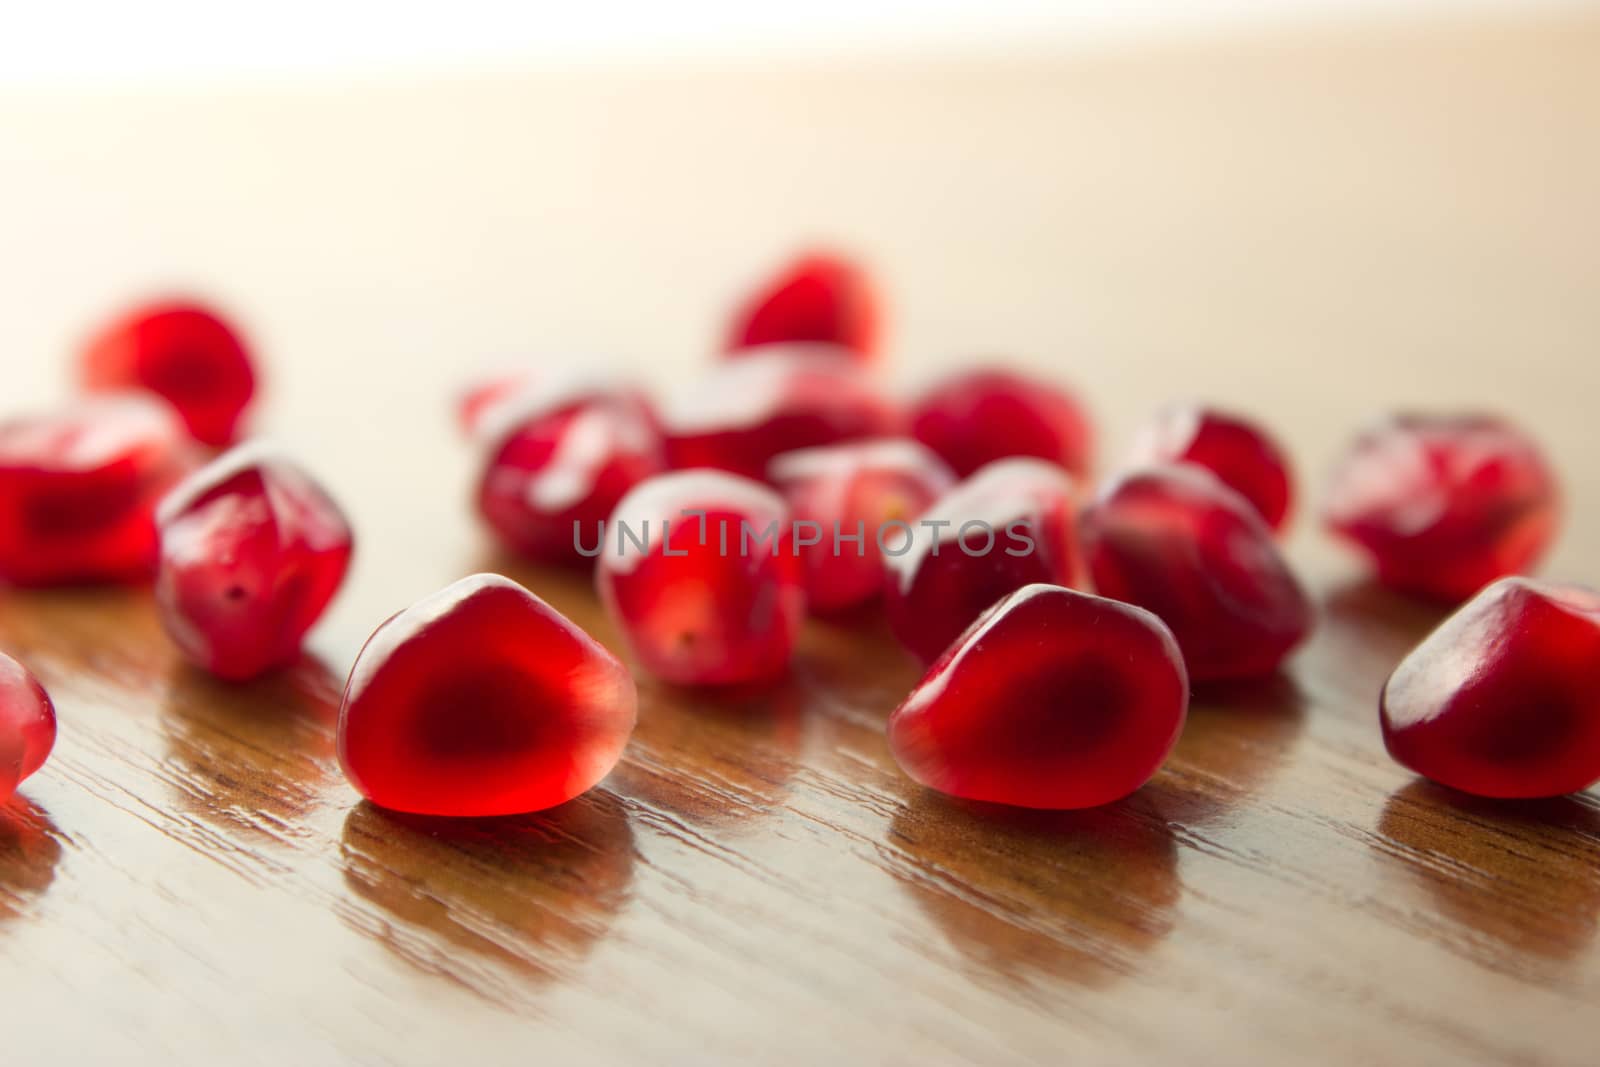 ripe, red garnets' seeds on wooden table